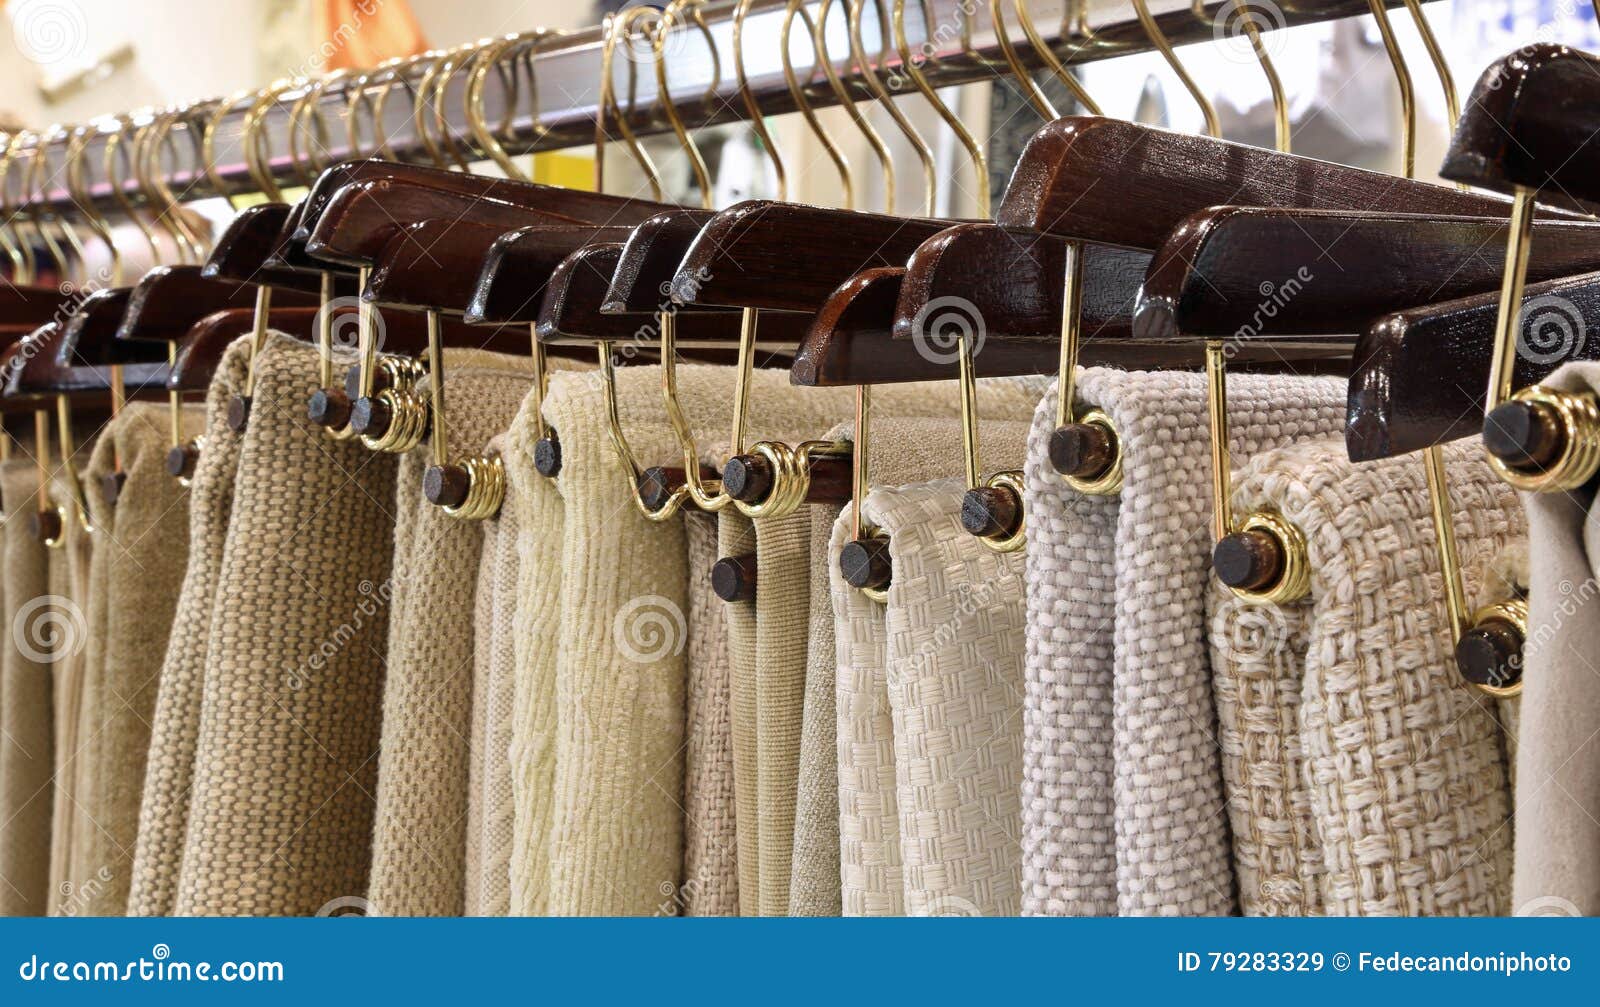 hangers with woven fabrics and tablecloths on sale